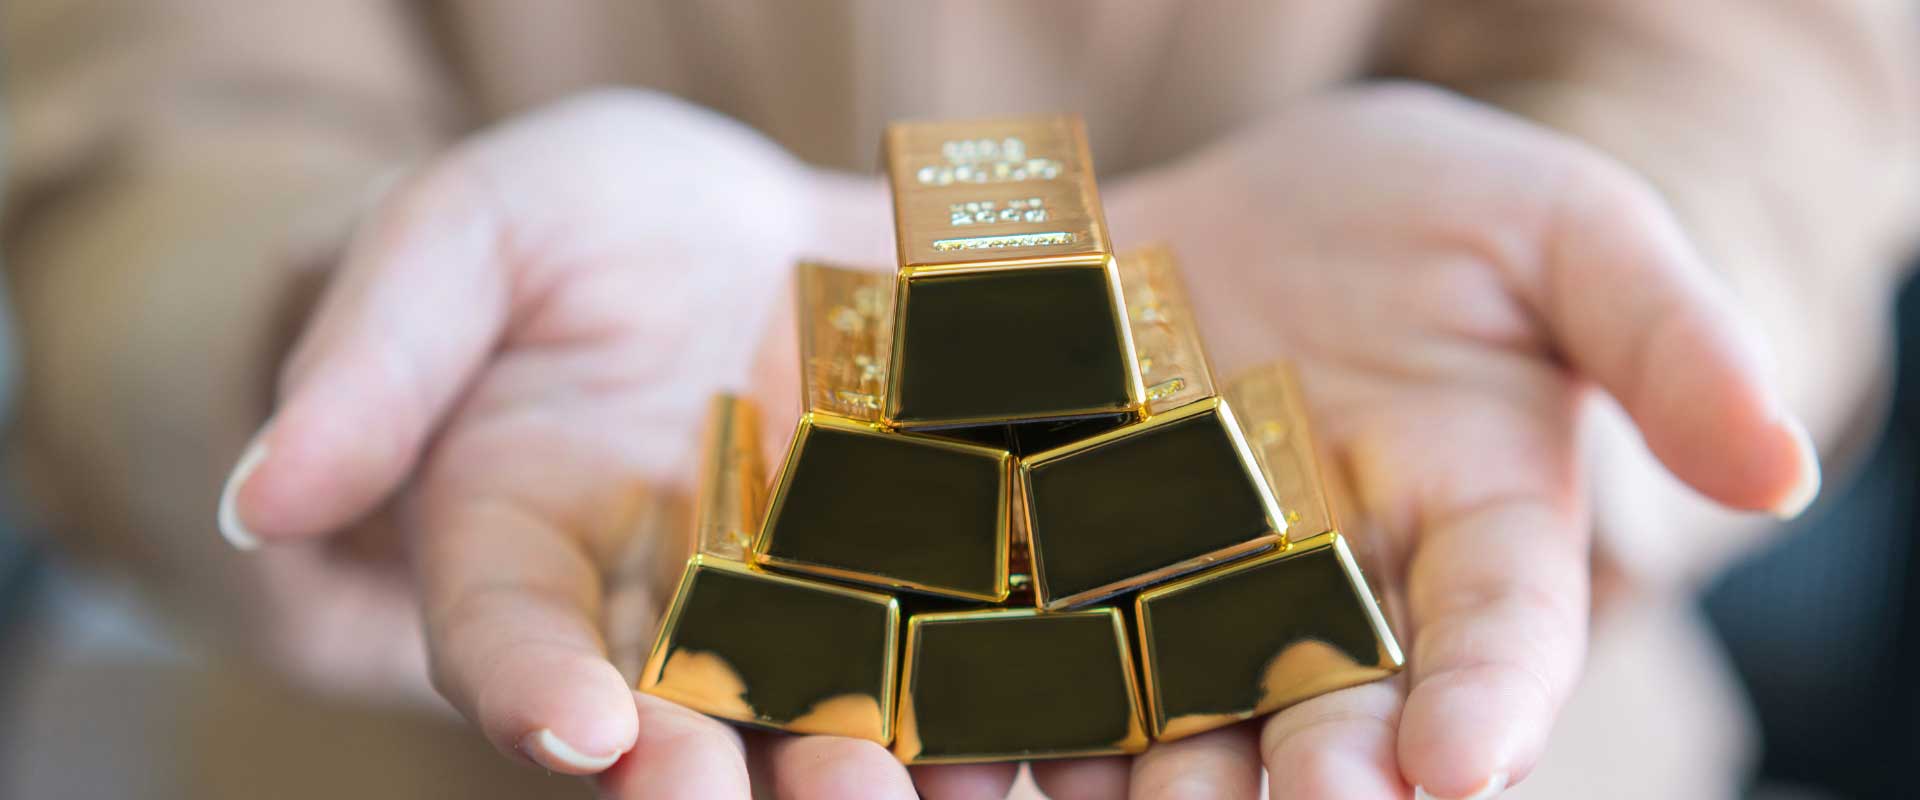 hands holding stack of gold bars